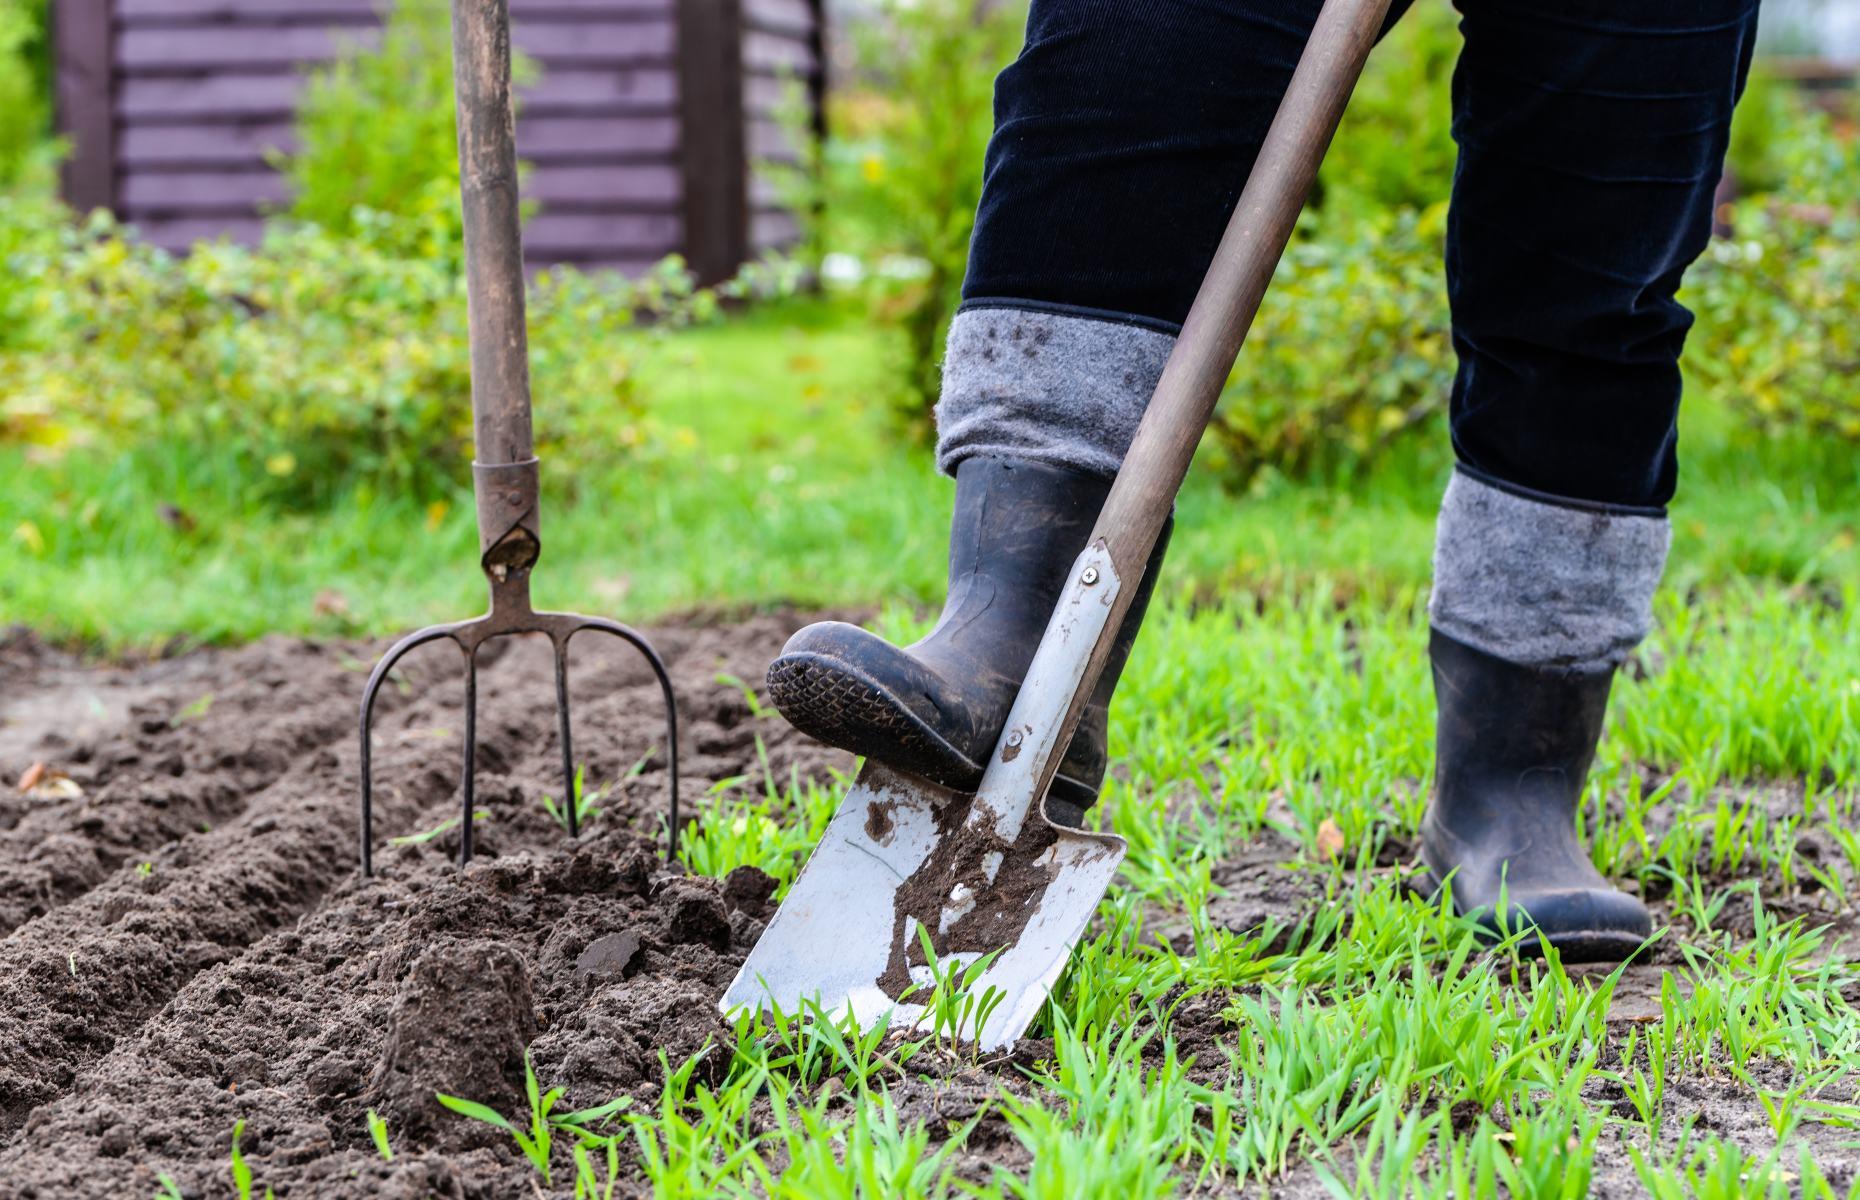 <p>Preparation is everything, so start by digging out weeds, stems and roots and remove as many stones on your patch as possible. Then feed your soil with well-rotted compost or manure, which should be raked level. Add <a href="https://www.loveproperty.com/news/96178/how-to-grow-your-own-vegetables-from-food-scraps">organic matter</a> like composted leaves or shredded aged bark to the surface of the soil when you can and at least once a year to build up long-term soil health, and if you need a quick fix, try an organic fertilizer.</p>